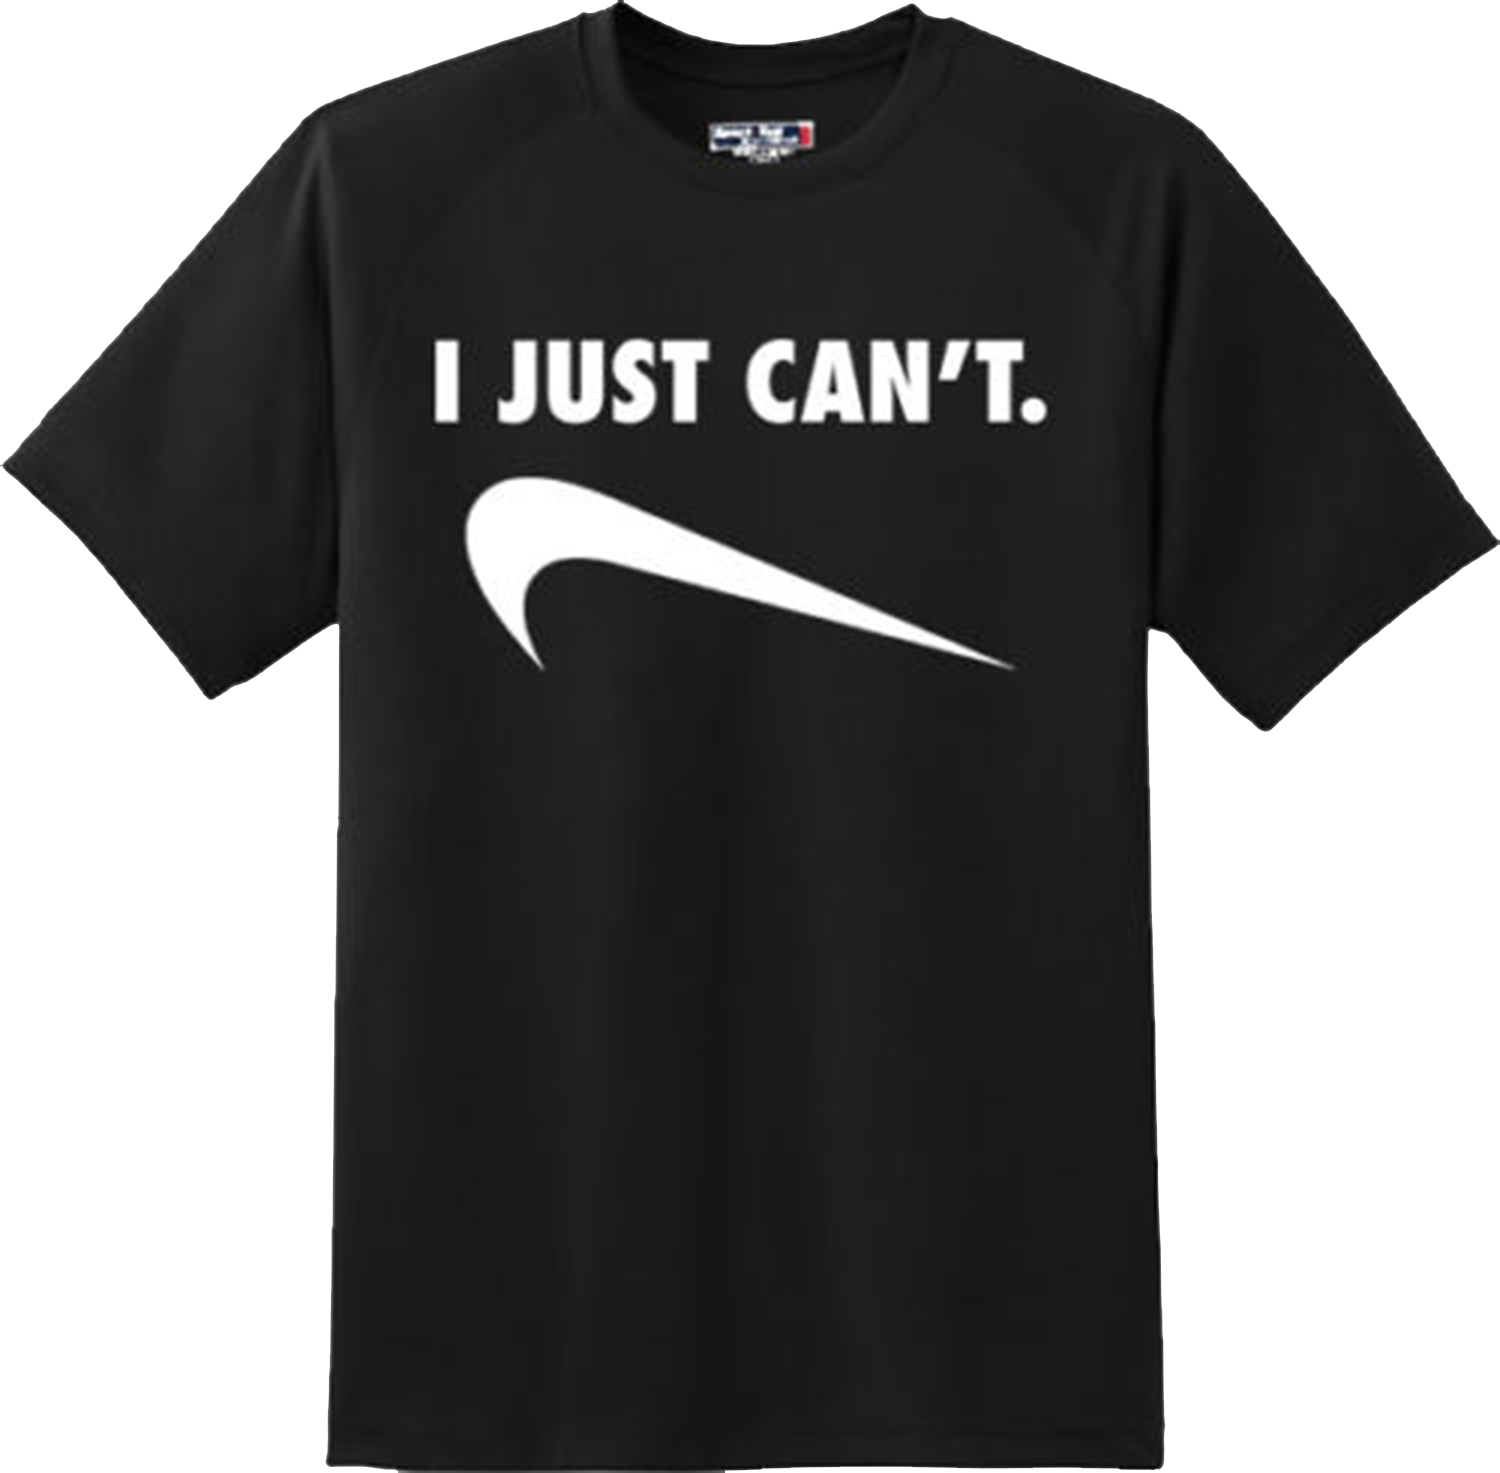 Funny I Just Can't T Shirt New Graphic Tee